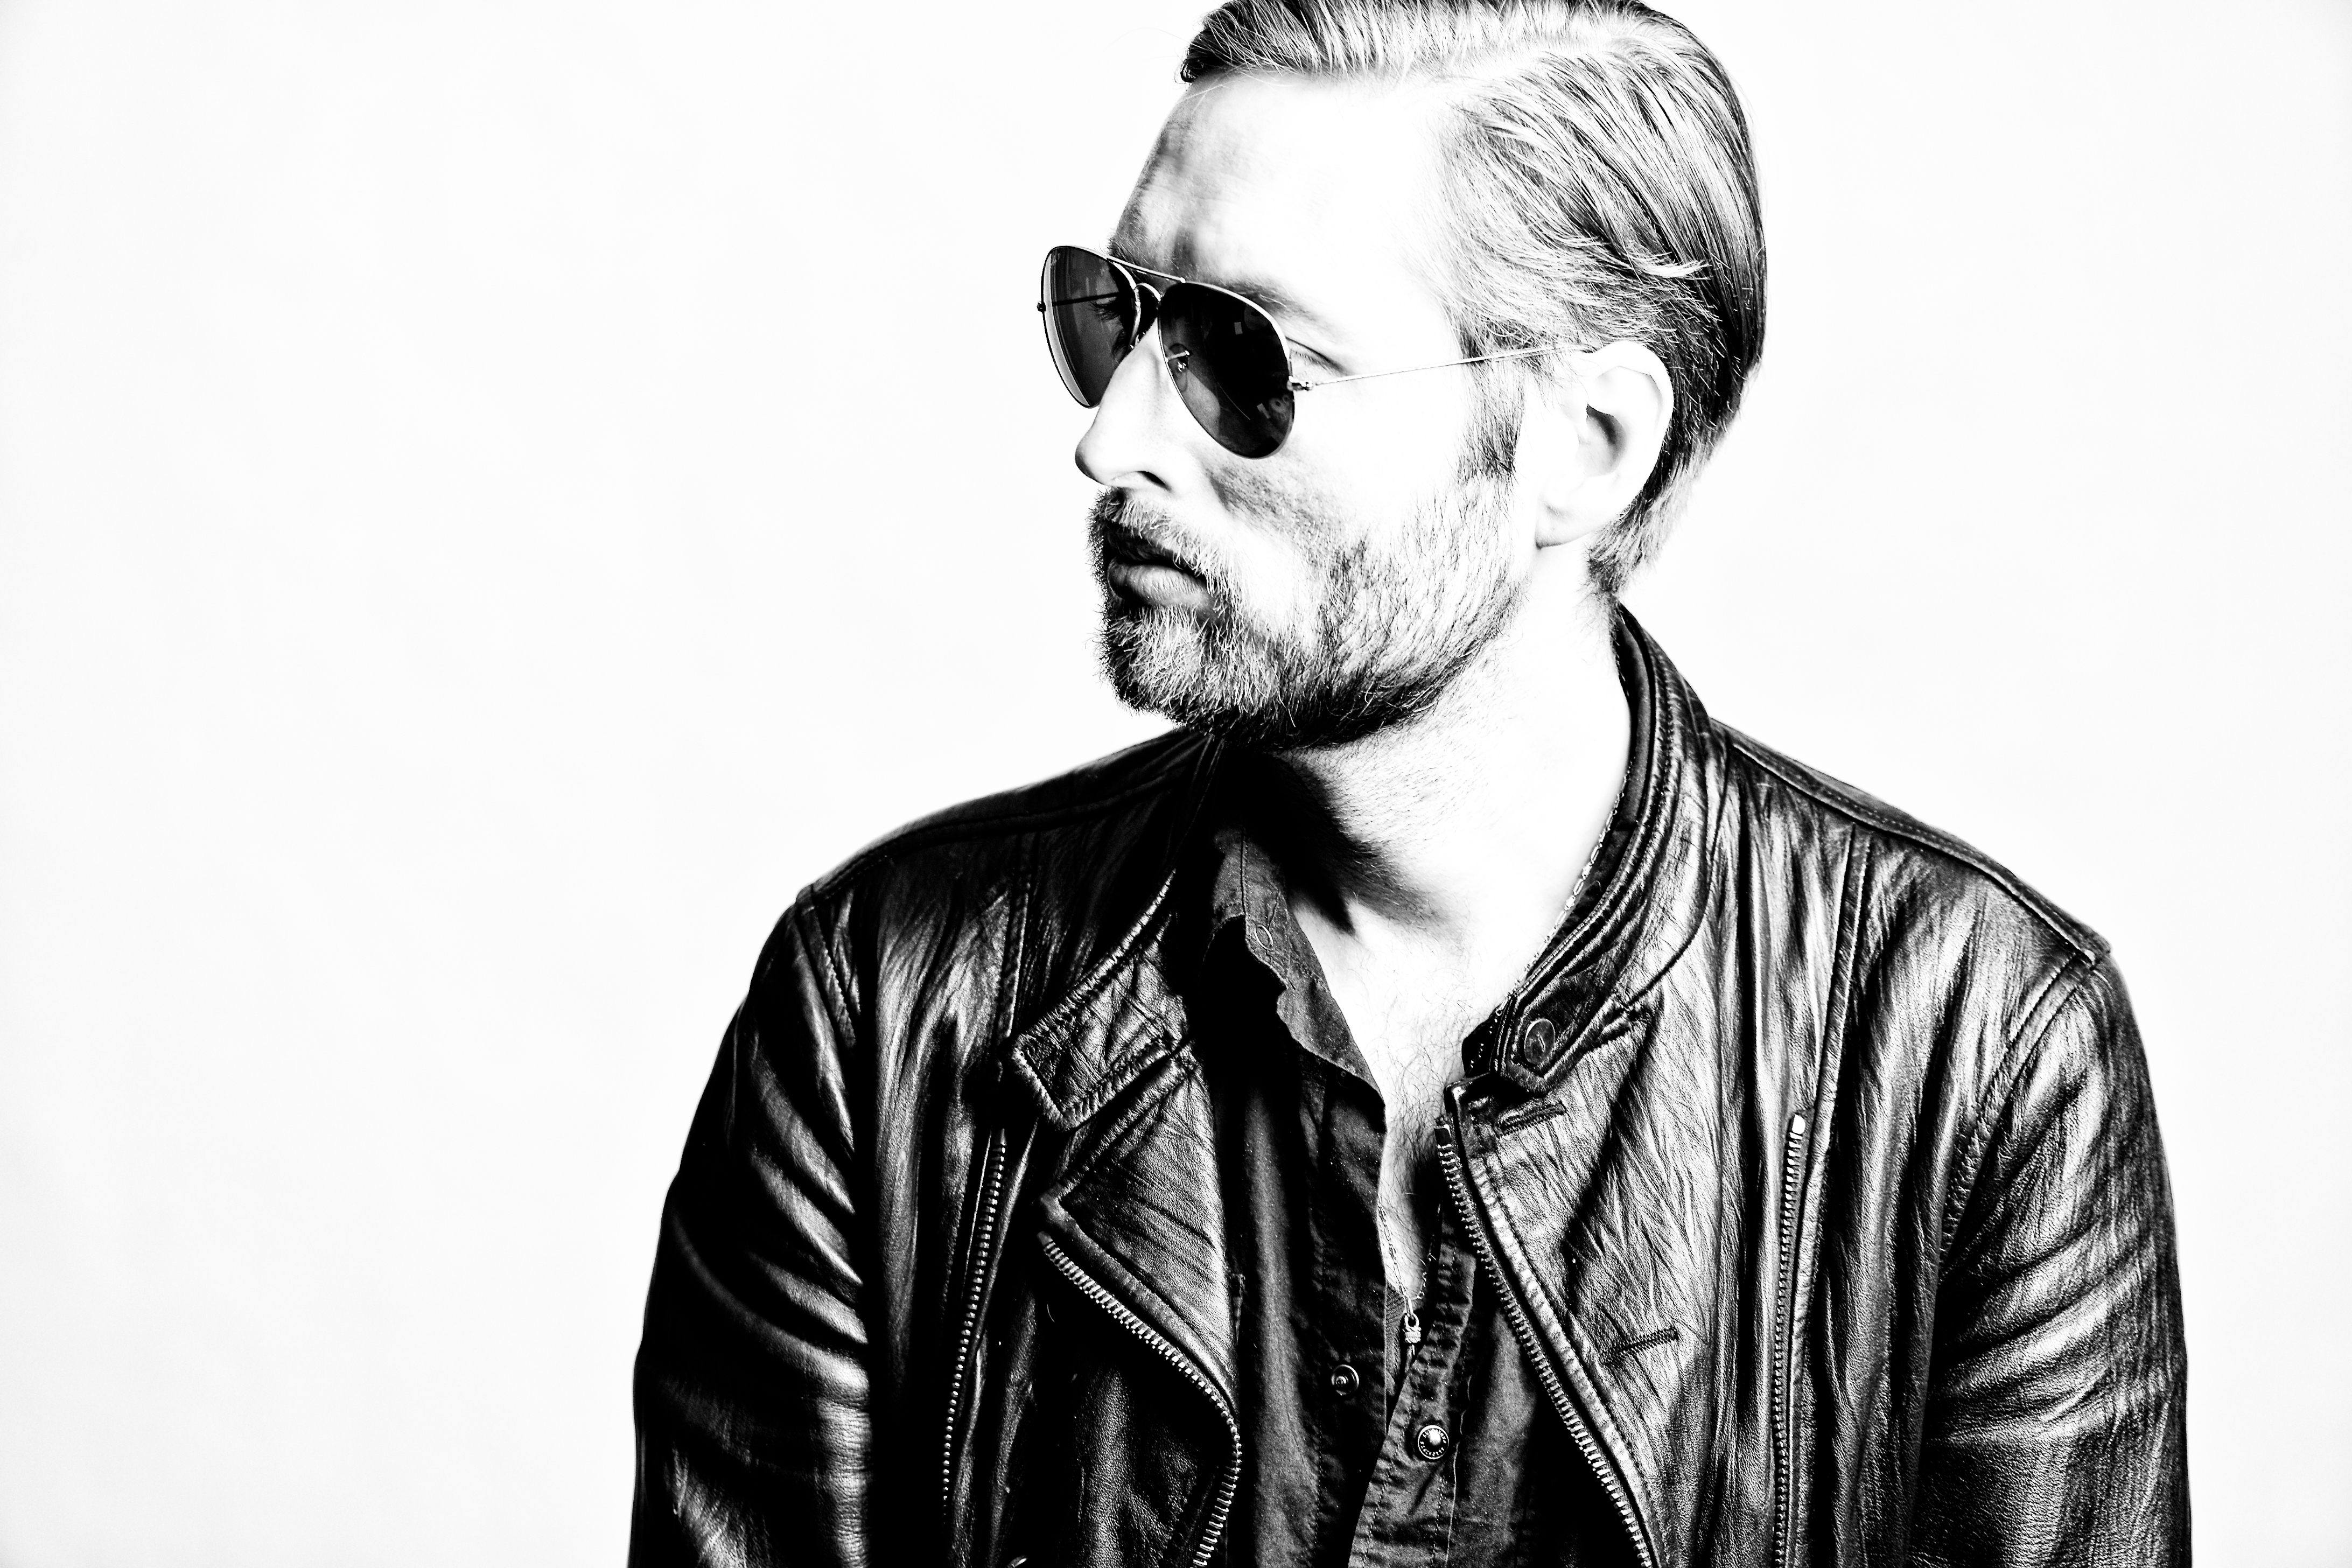 Interview with Mark Stoermer, by Matthew Wardell. The bassist for the Killers/Smashing Pumpkins, solo release 'Dark Art',